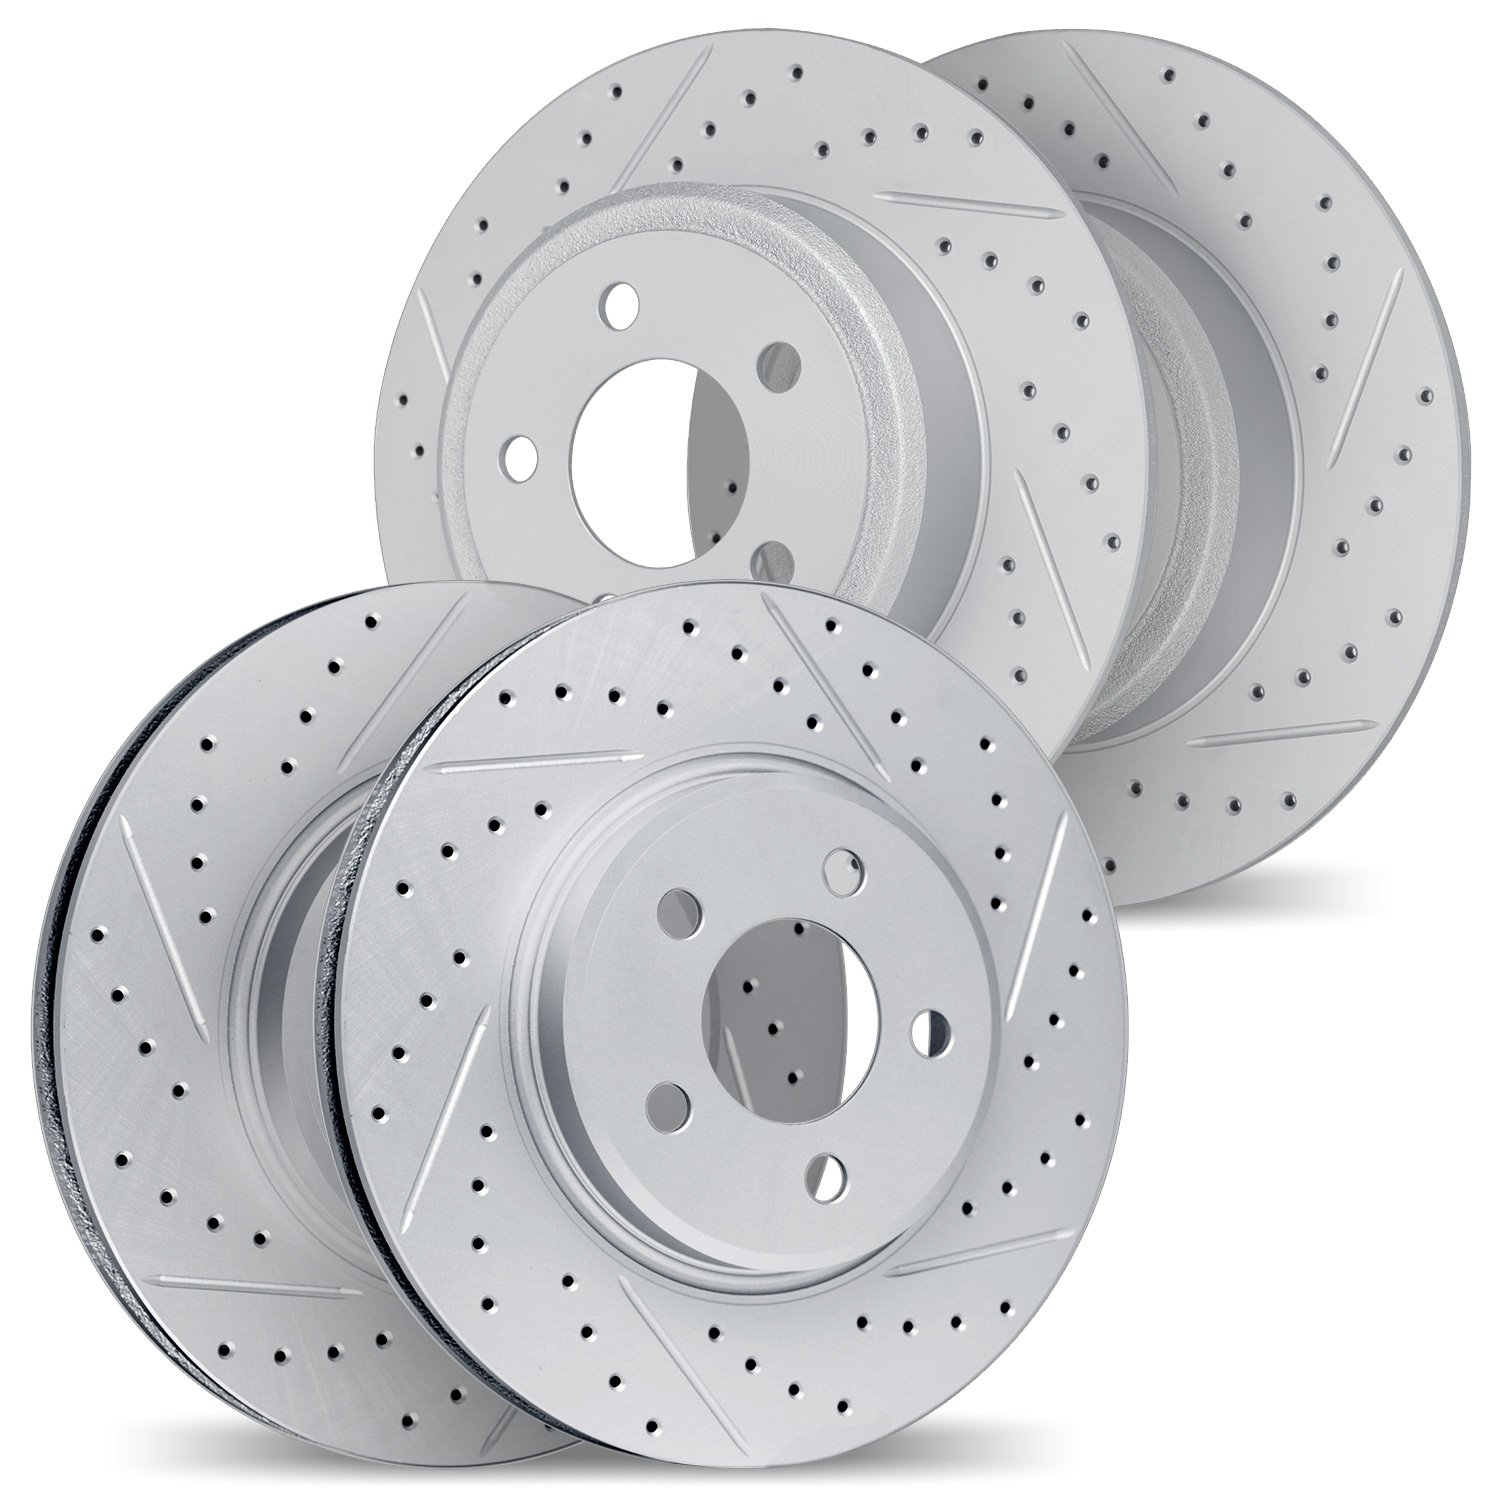 2004-45012 Geoperformance Drilled/Slotted Brake Rotors, 2006-2011 GM, Position: Front and Rear